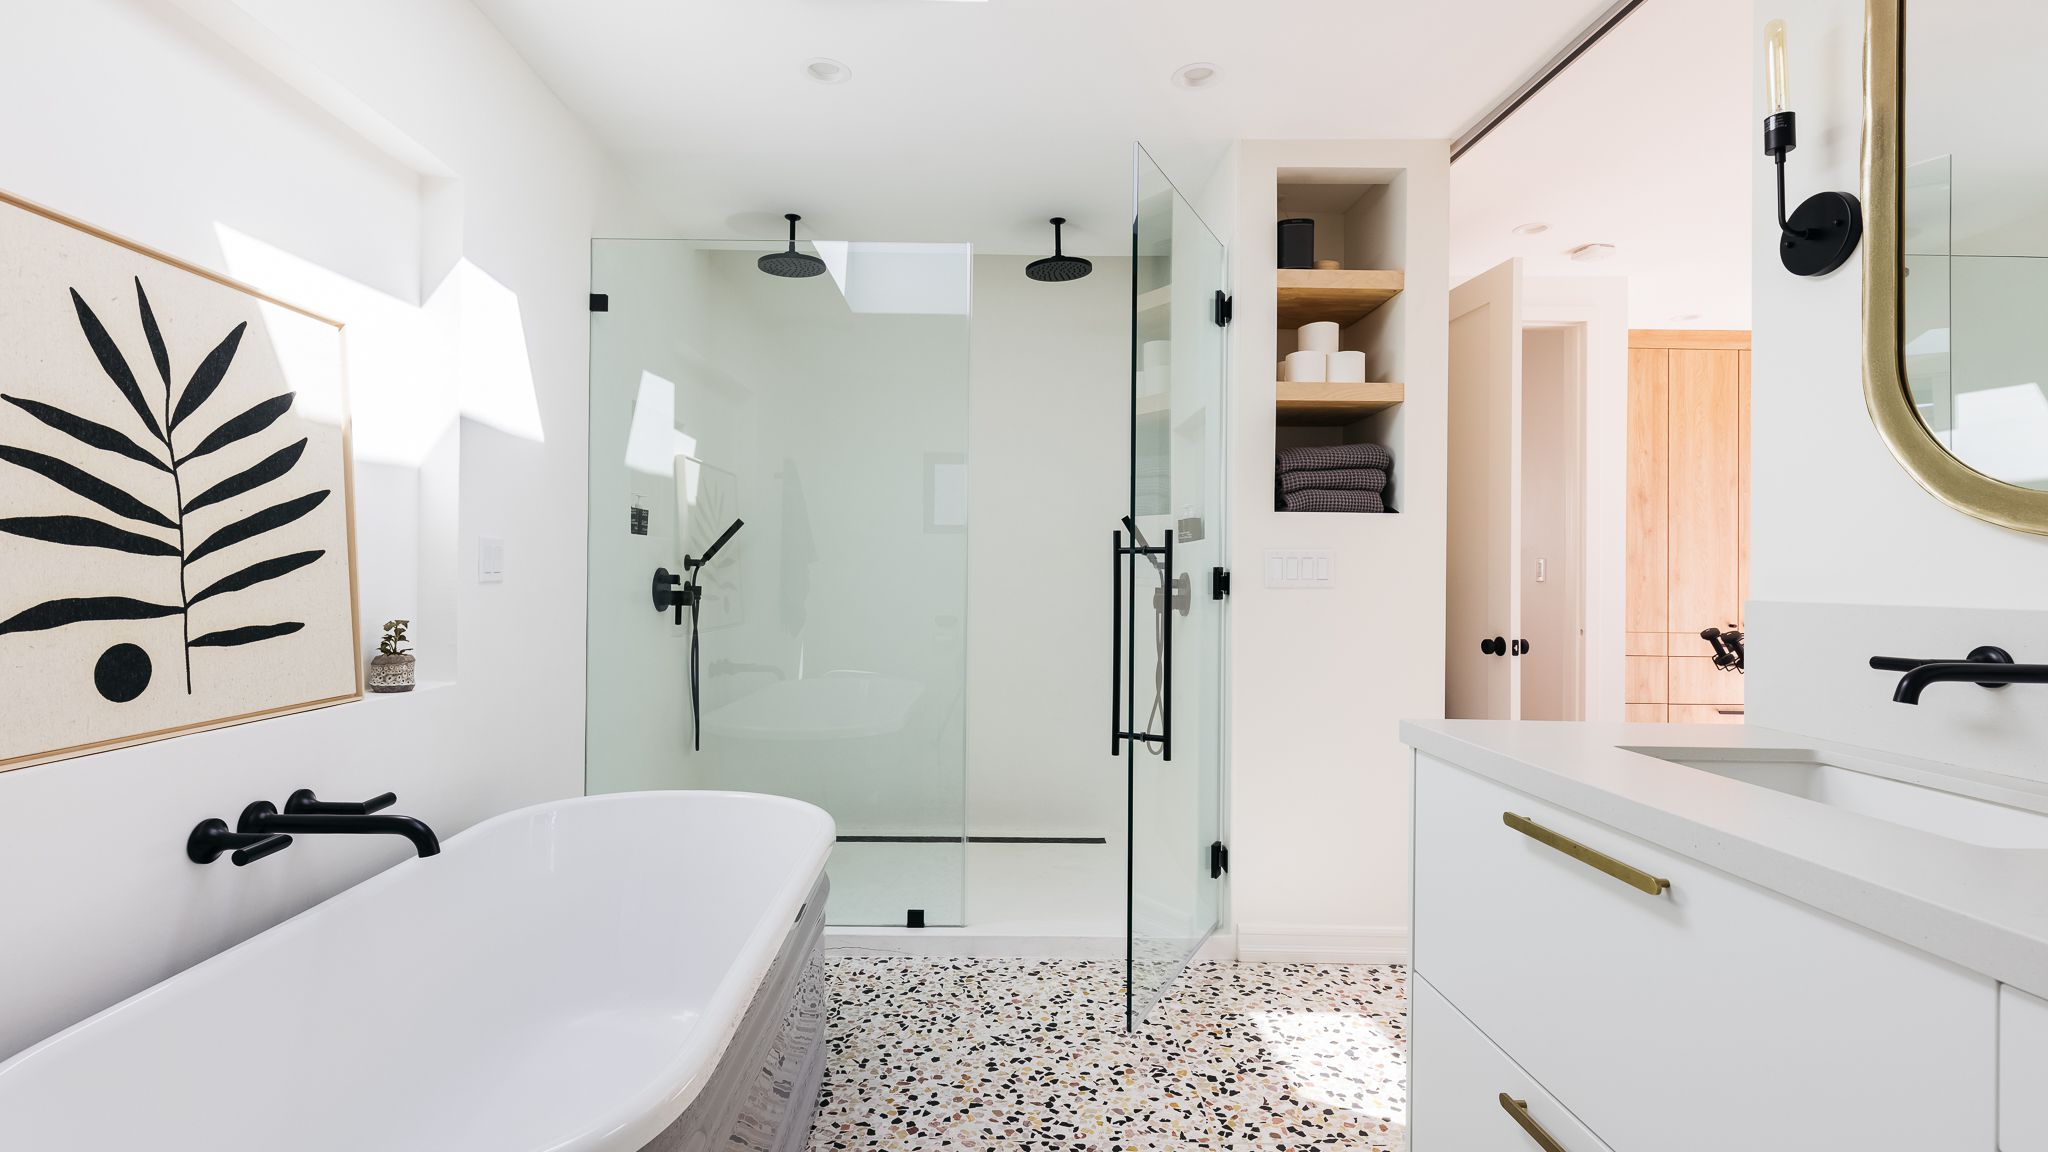 Primary reasons you should contact Reece Bathroom Consultant